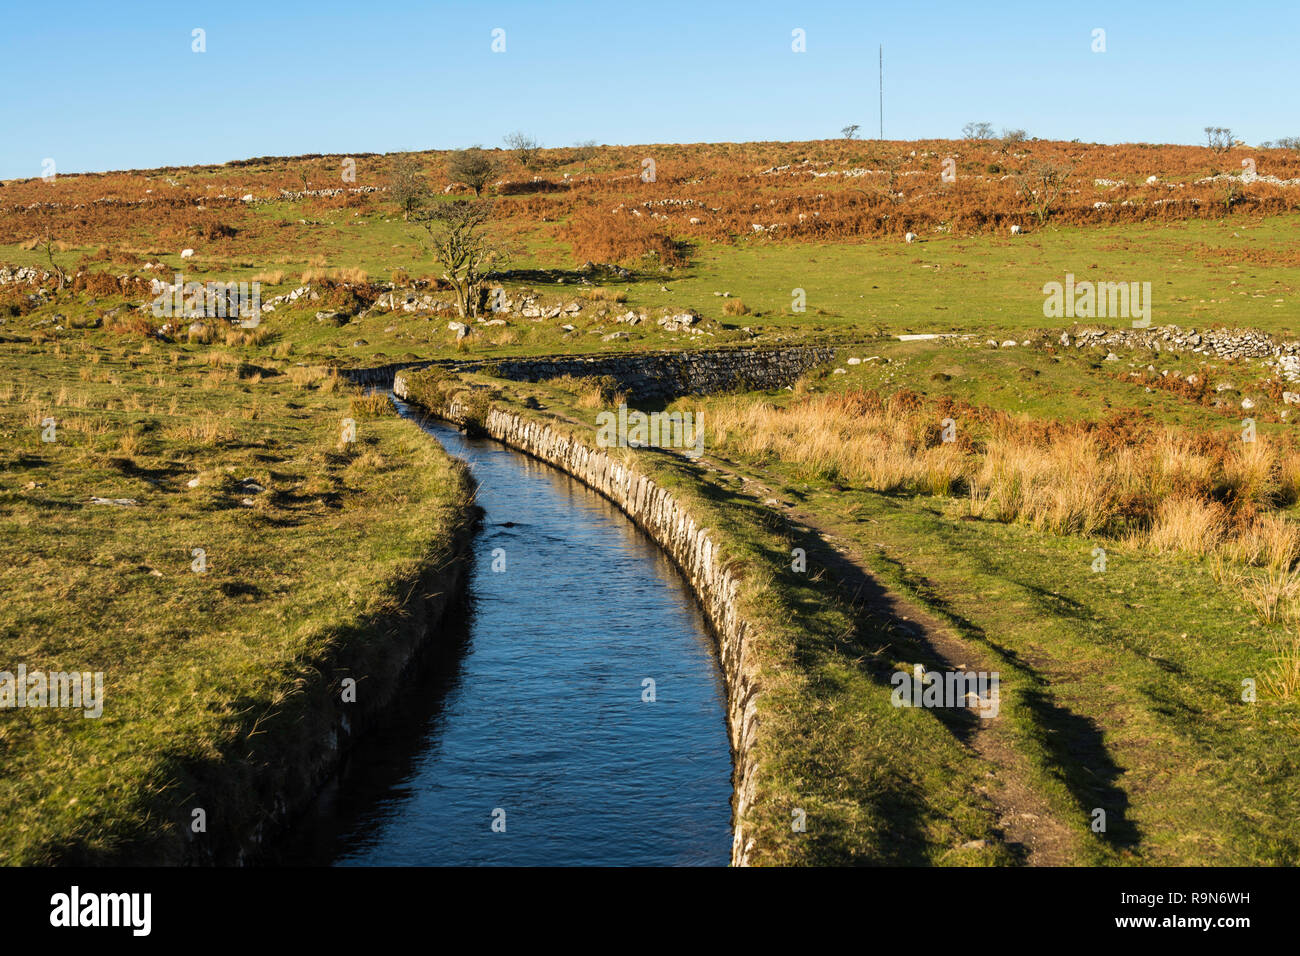 The Devonport Leat was built in the 1790s to carry fresh water from Dartmoor to the Dockyards of Plymouth. Stock Photo